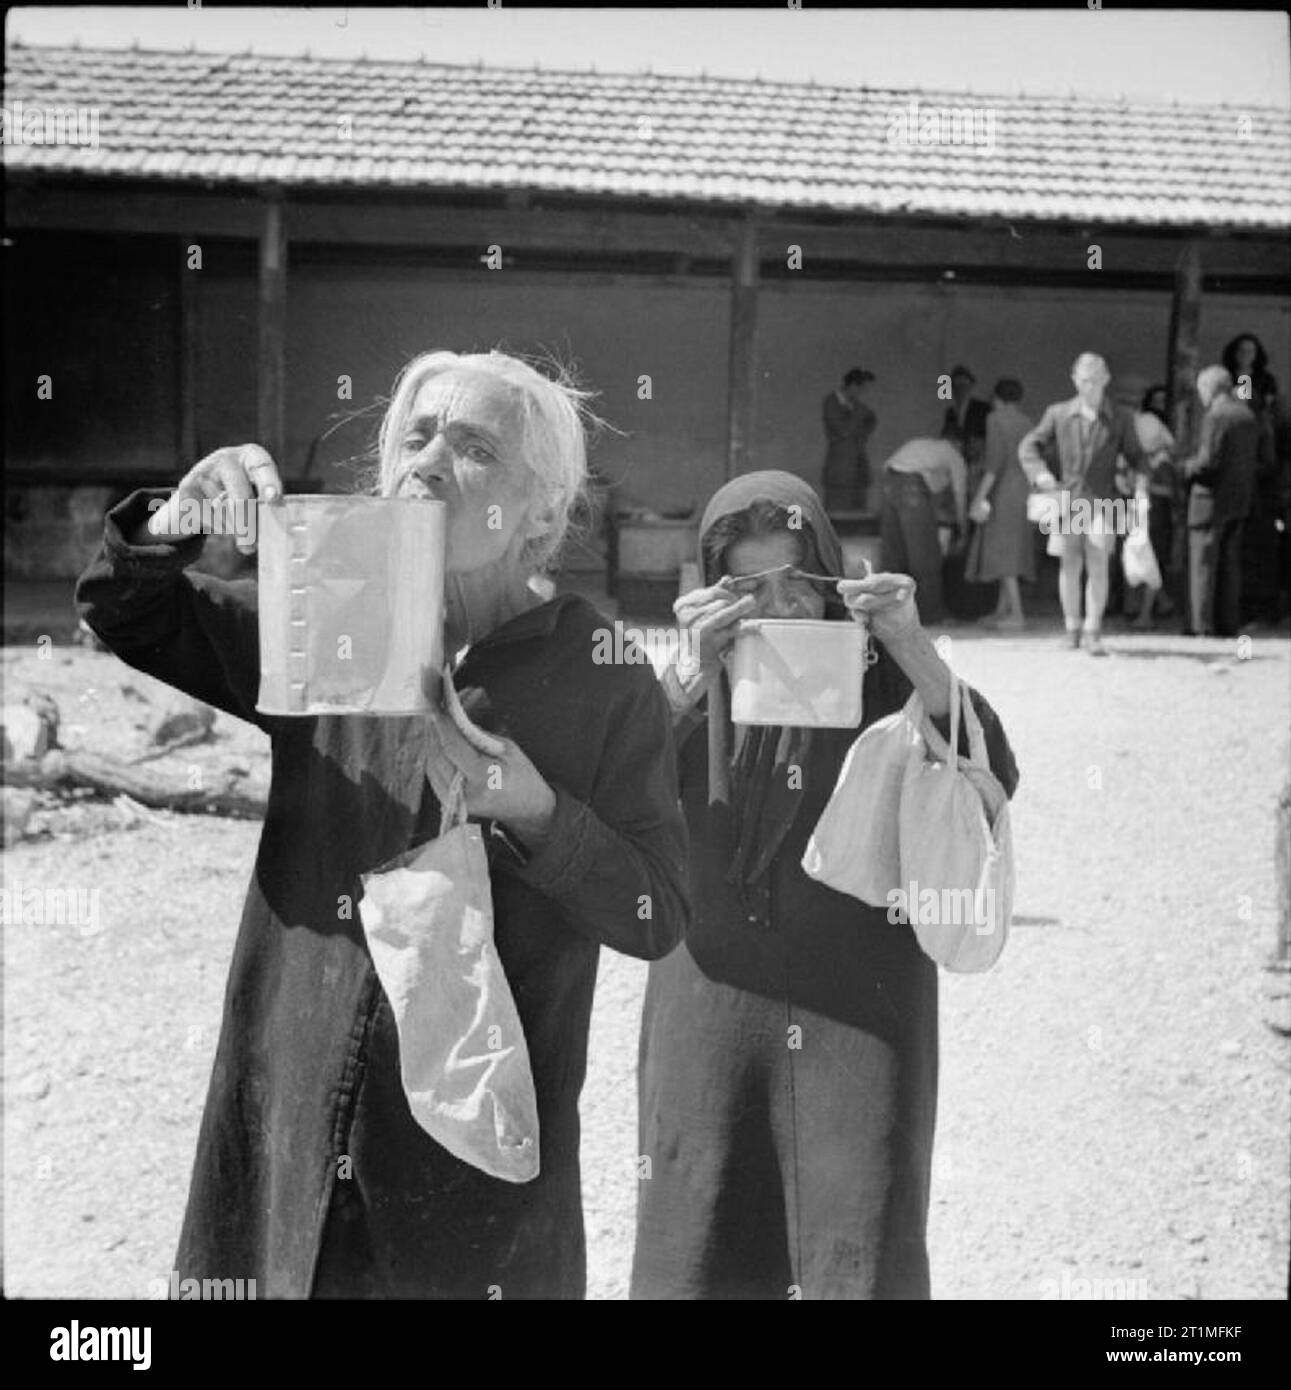 The Liberation of Rhodes, 1945 Two elderly Greek women sip their soup as they leave a Red Cross kitchen. They also carry bags so that they can call at a food distribution centre to collect their rations. During the German occupation the local inhabitants had suffered the effects of malnutrition due to insufficient food. After the liberation of the island the British quickly began to organize food supplies, issuing people with ration books and distributing essential food stuffs. Red Cross kitchens also assisted by providing nourishing soup. Stock Photo